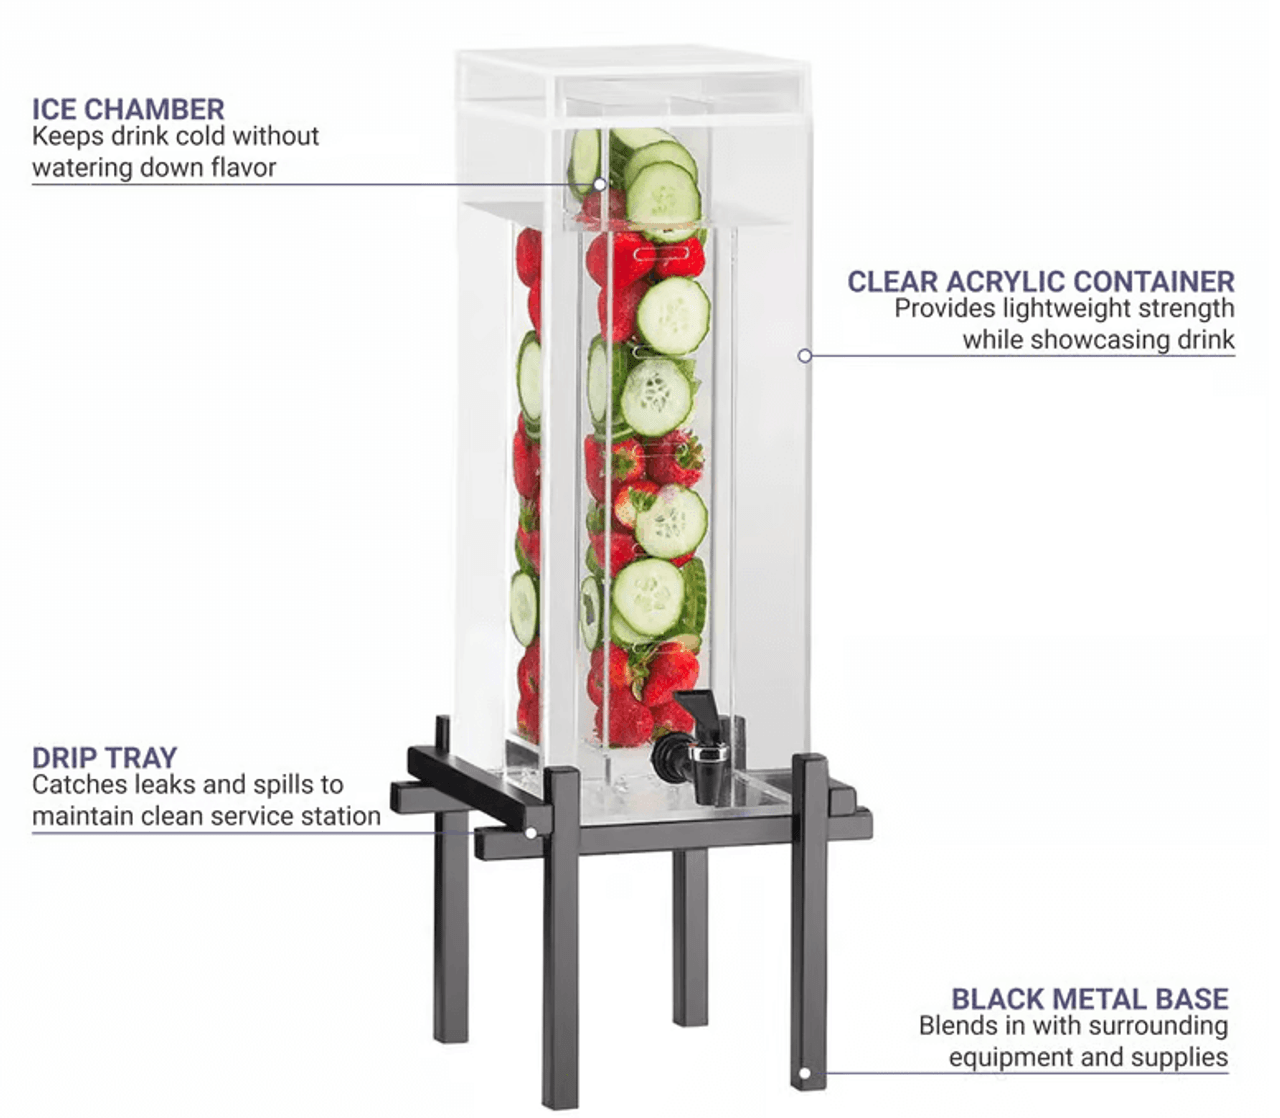 Cal-Mil 1 1/2 gal Beverage Dispenser w/ Infuser Clear Acrylic & Black Metal Base - Chicken Pieces